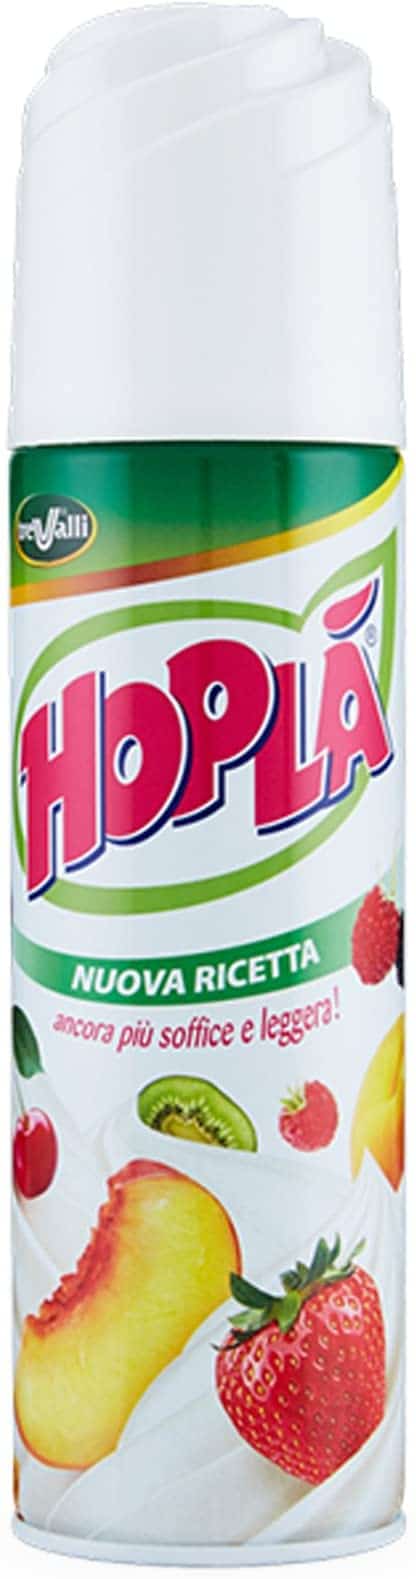 Sauce: PANNA MONTATA SPRAY HOPLA' ML.250 – Sweetened whipped cream  “Imported from Italy” – Terra World Wide